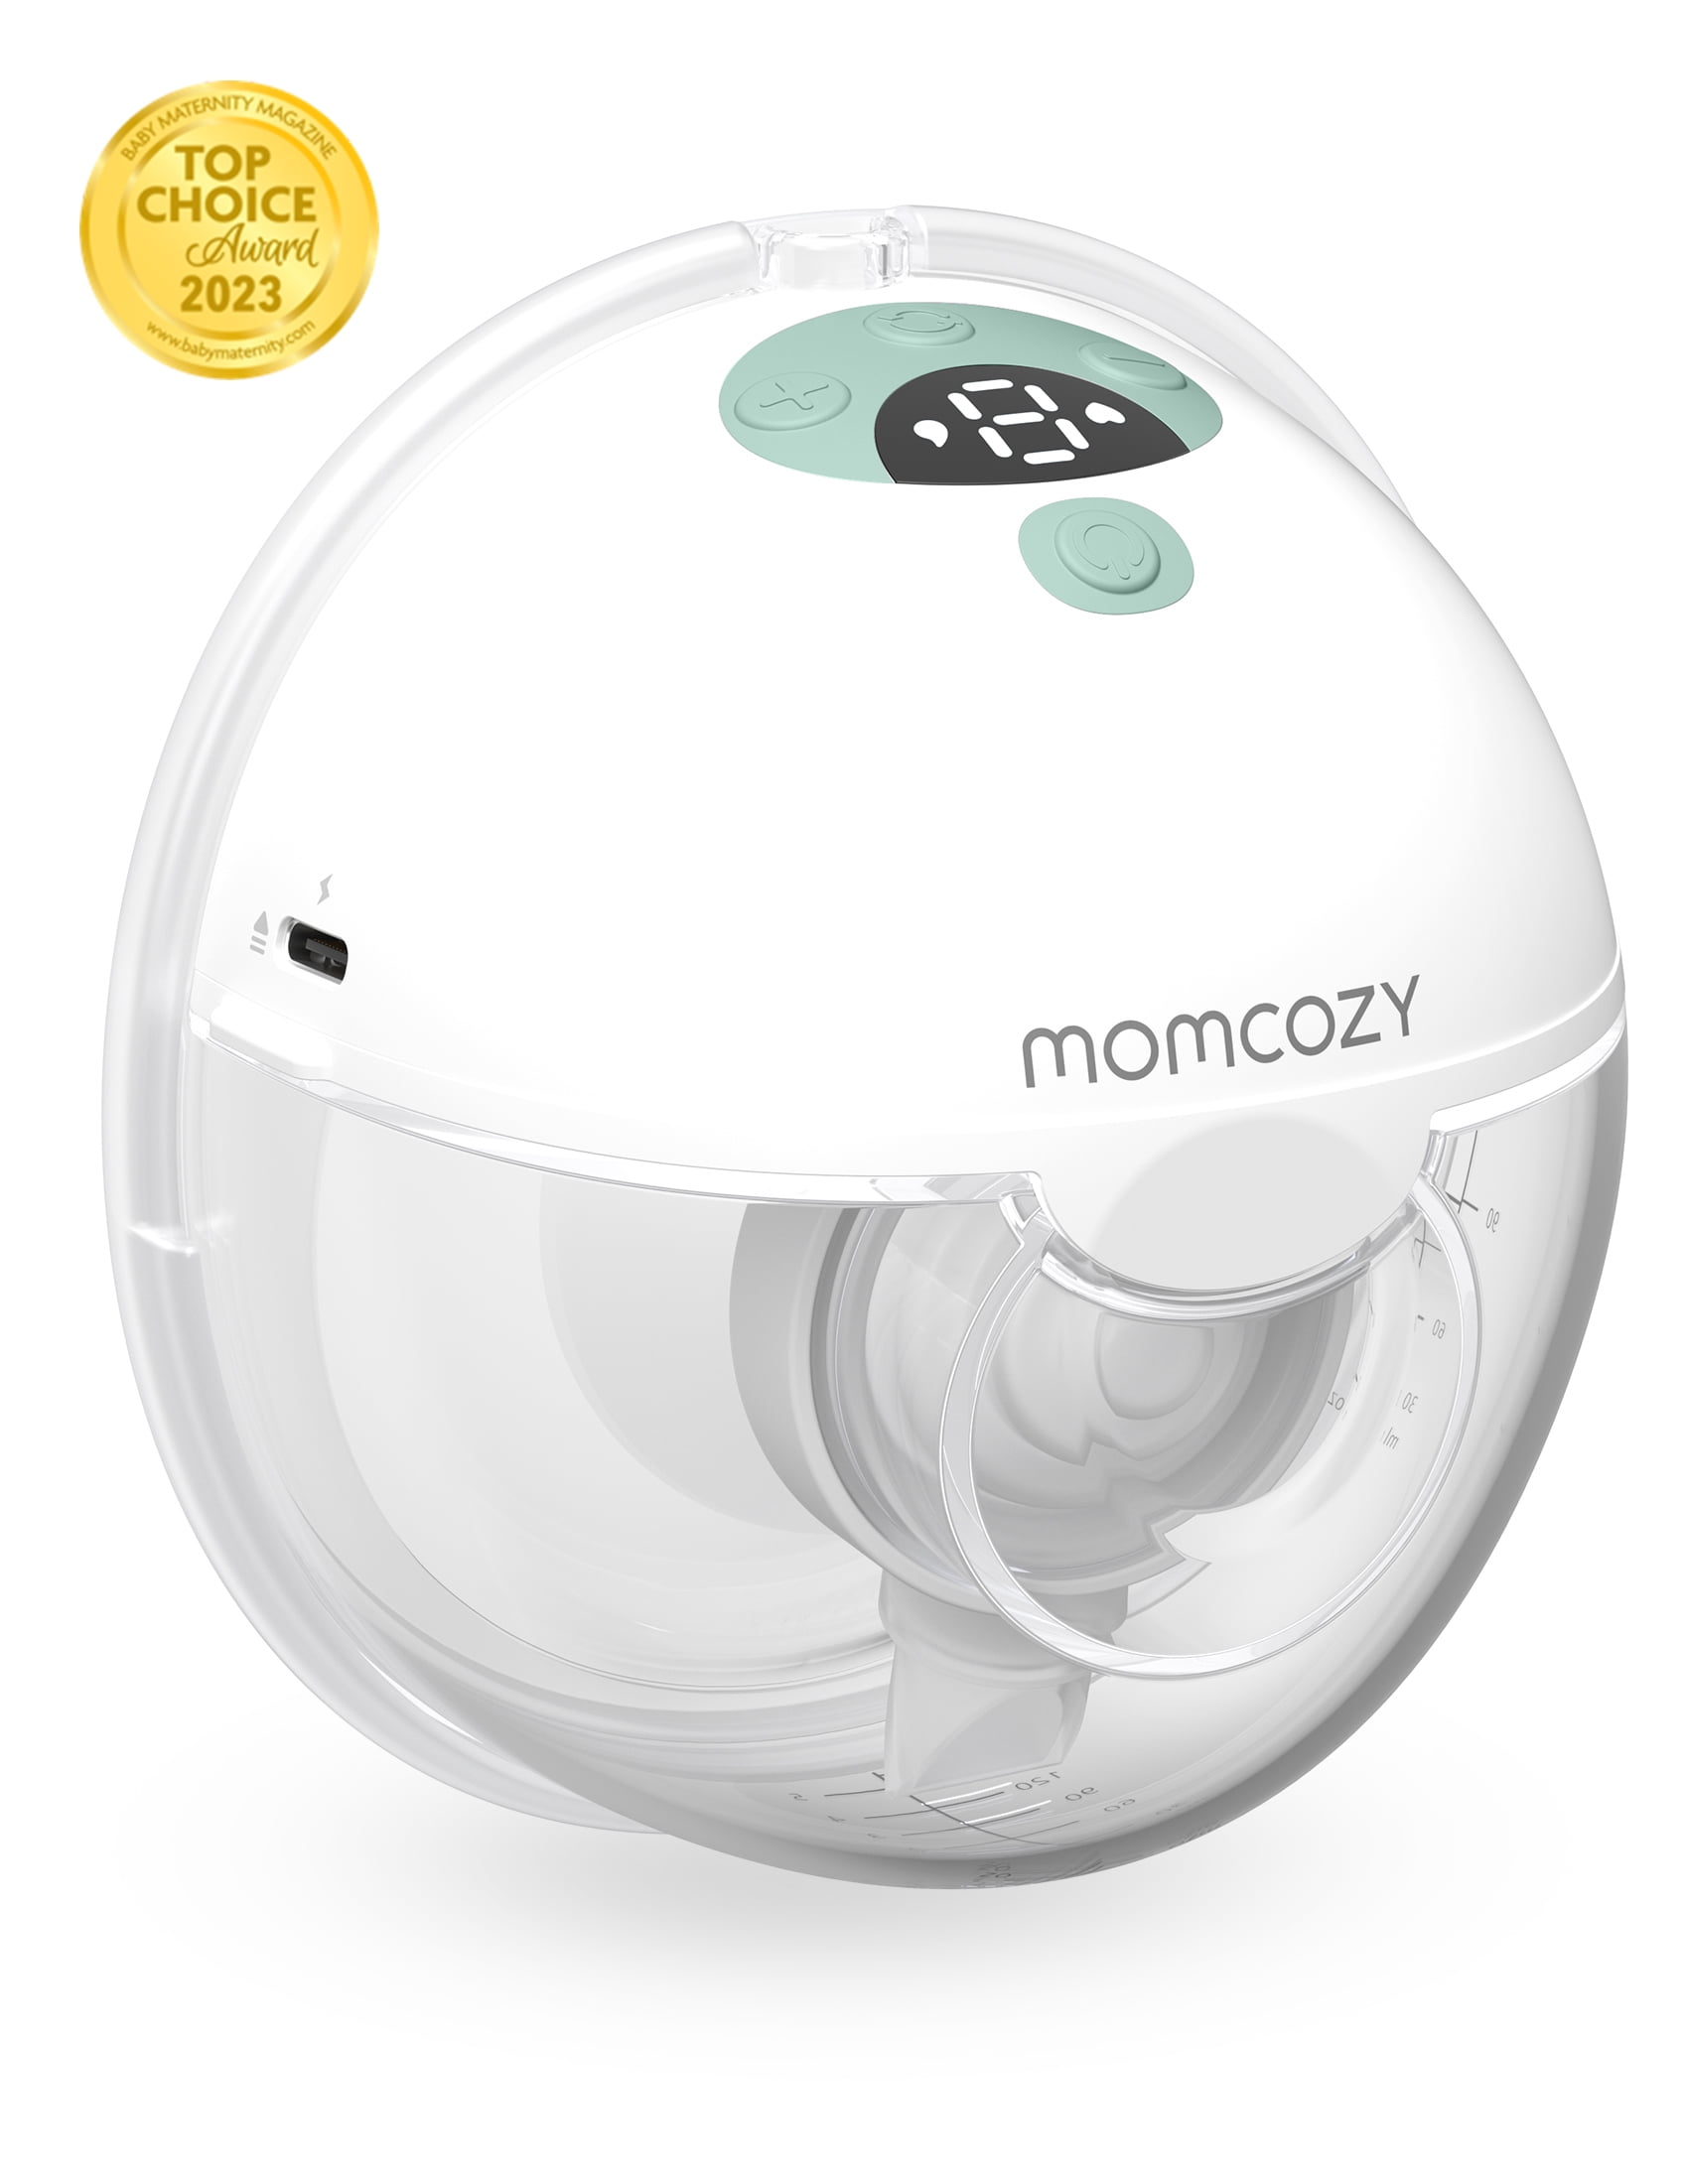 Momcozy Muse 5 Wirelss Breast Pump Hands free, Wearable Breast